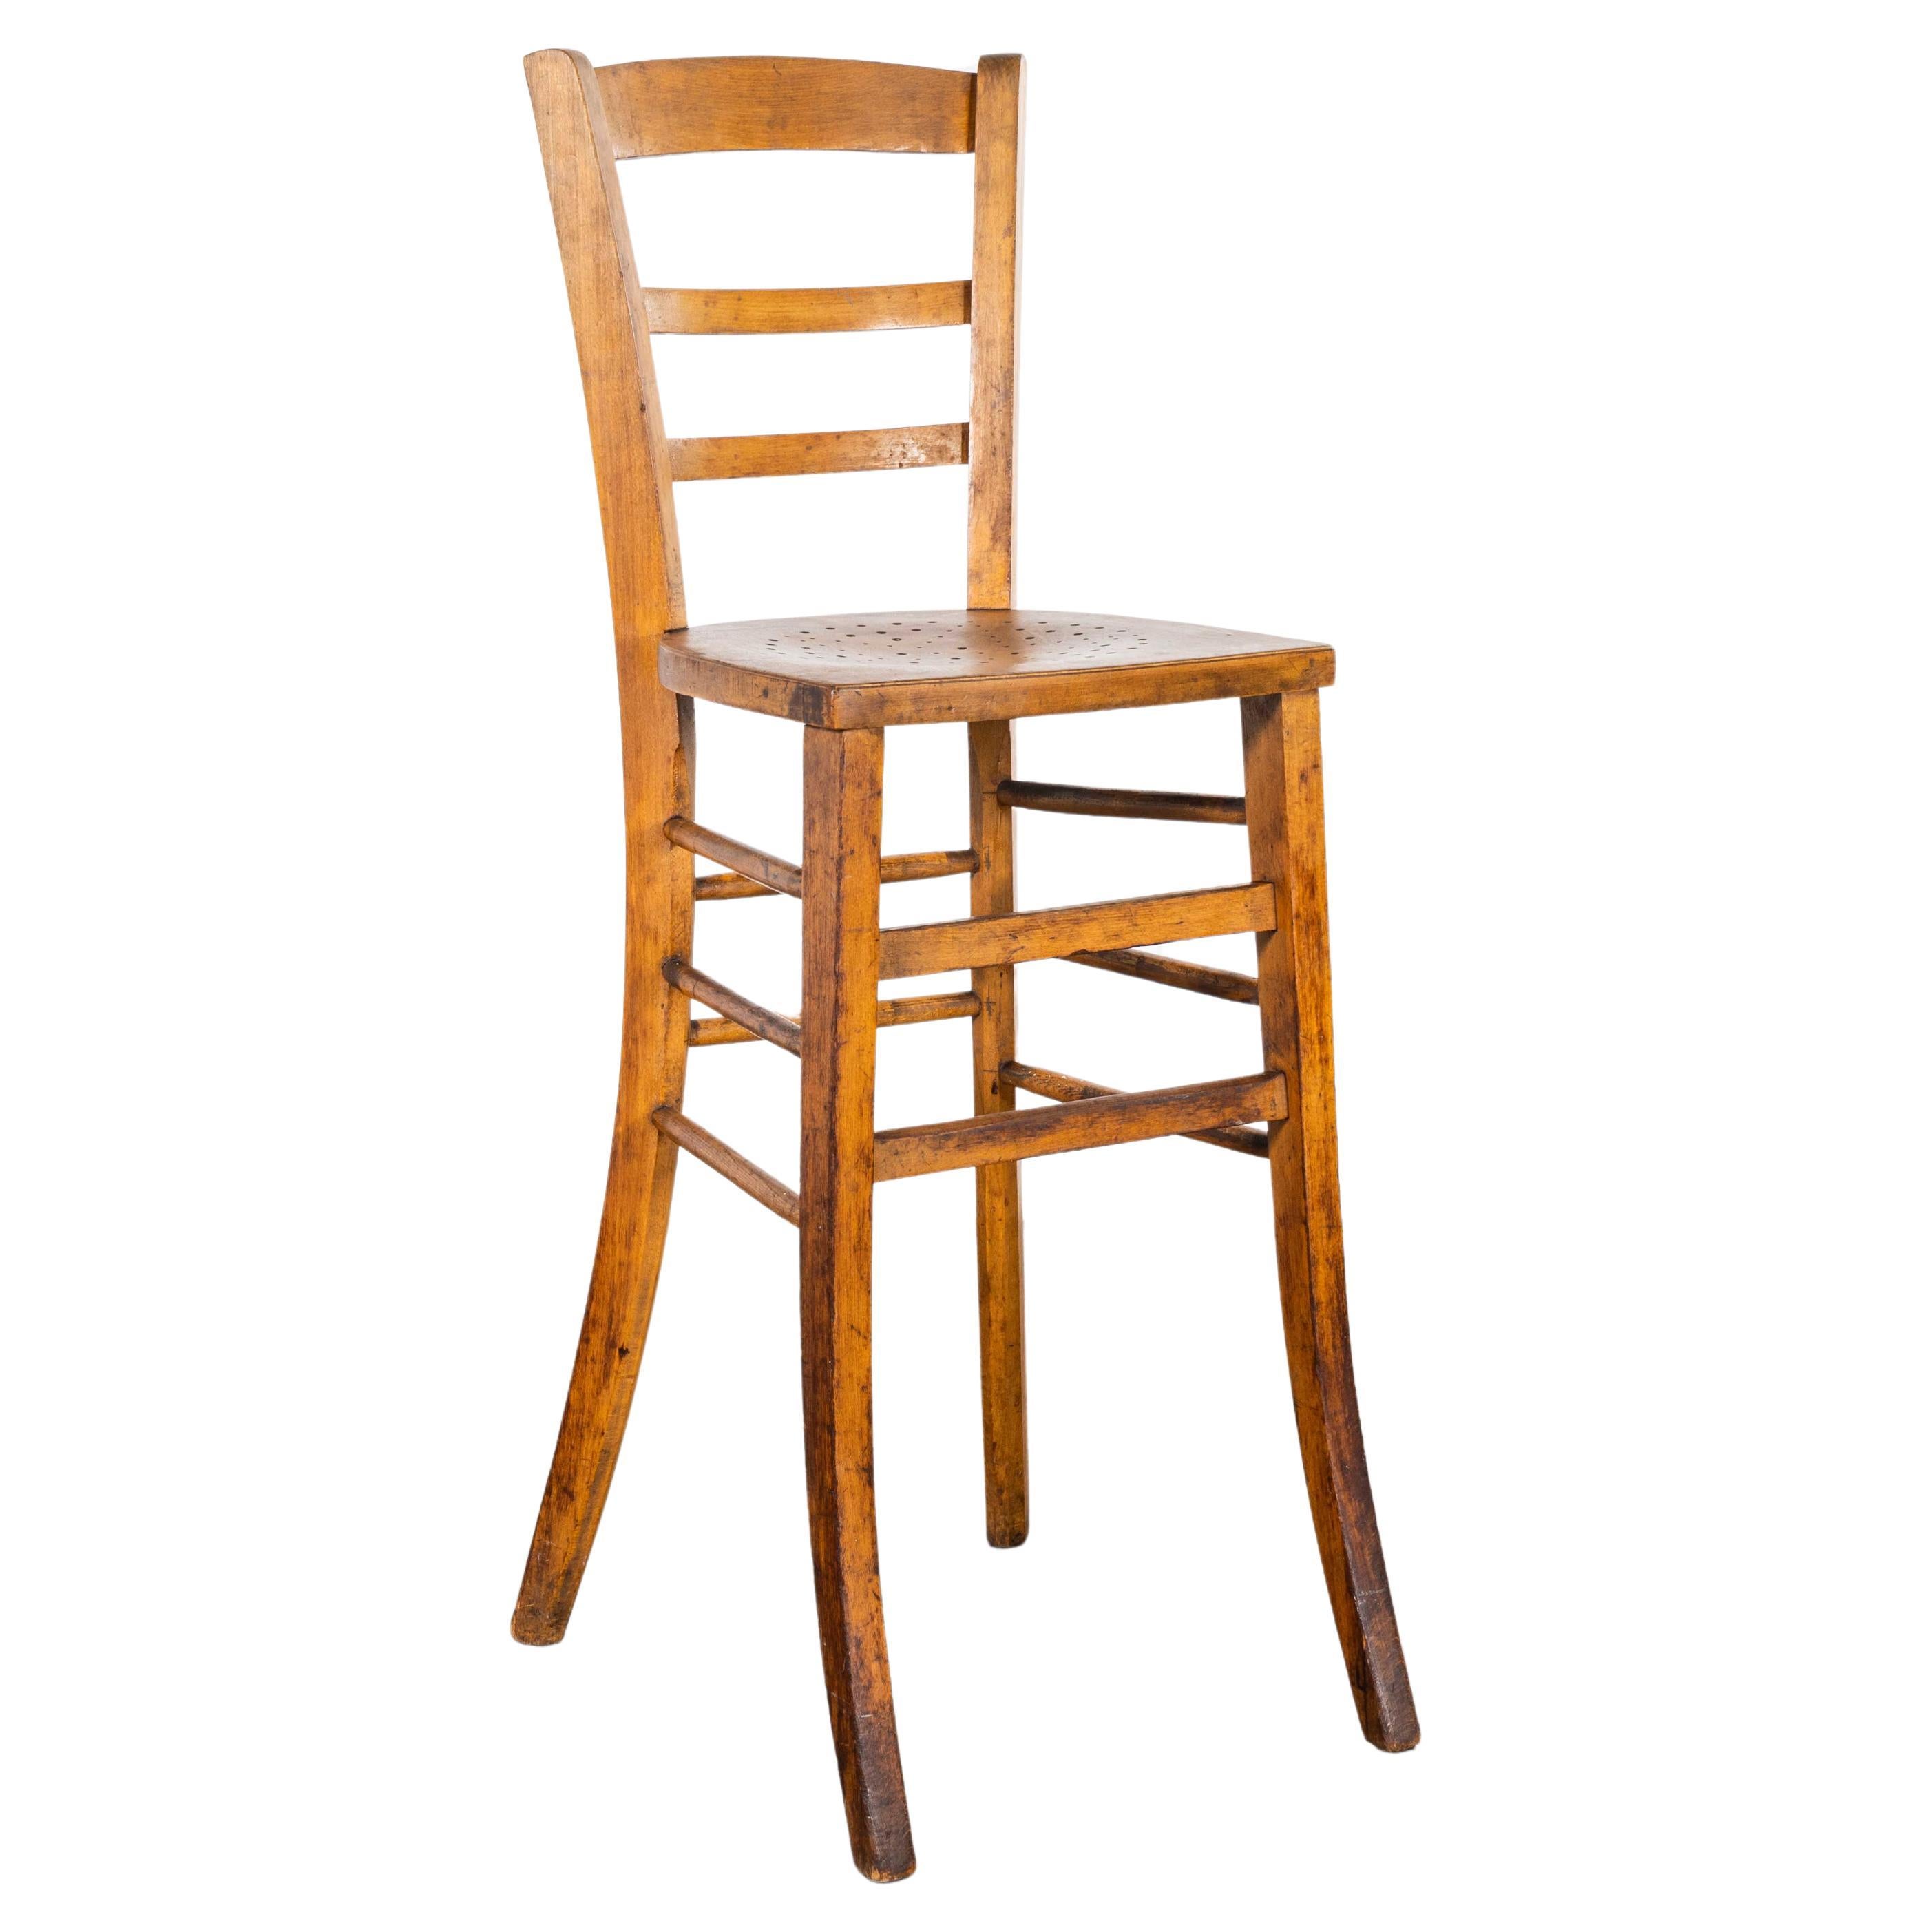 1950's French Luterma Blonde Bentwood Dining Chair - Bar Chair